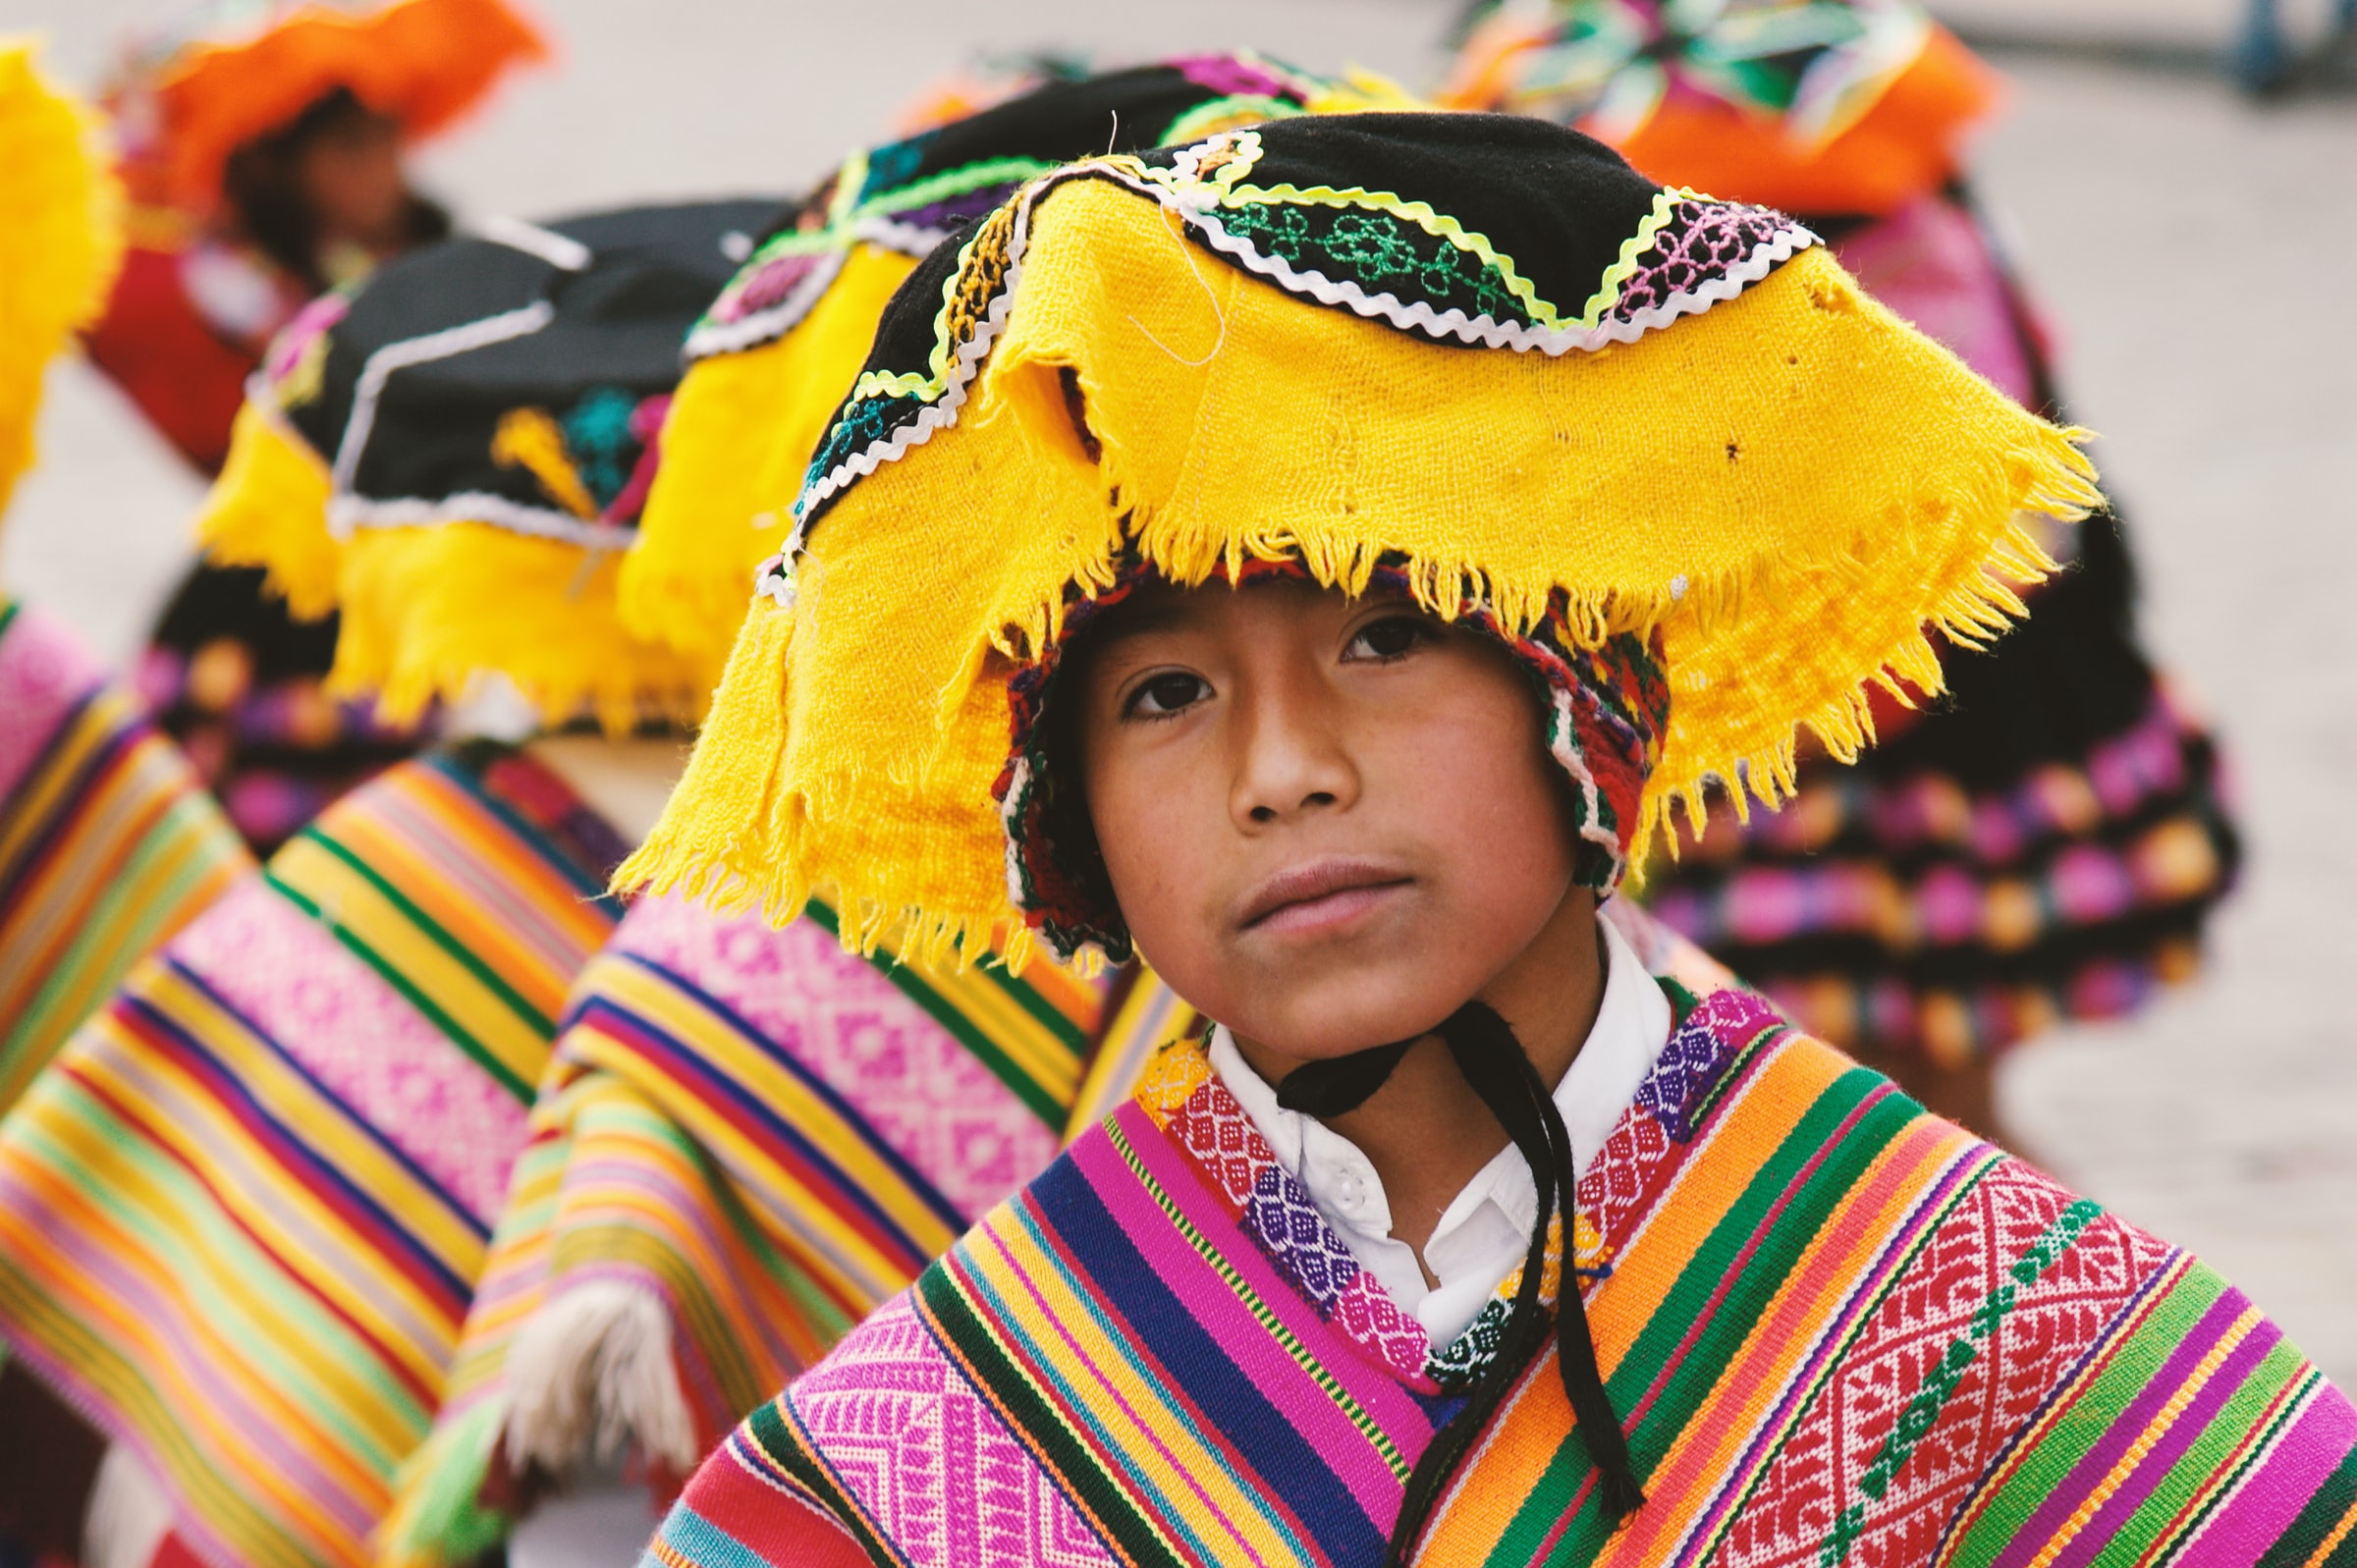 Peruvian boy is a traditional hat